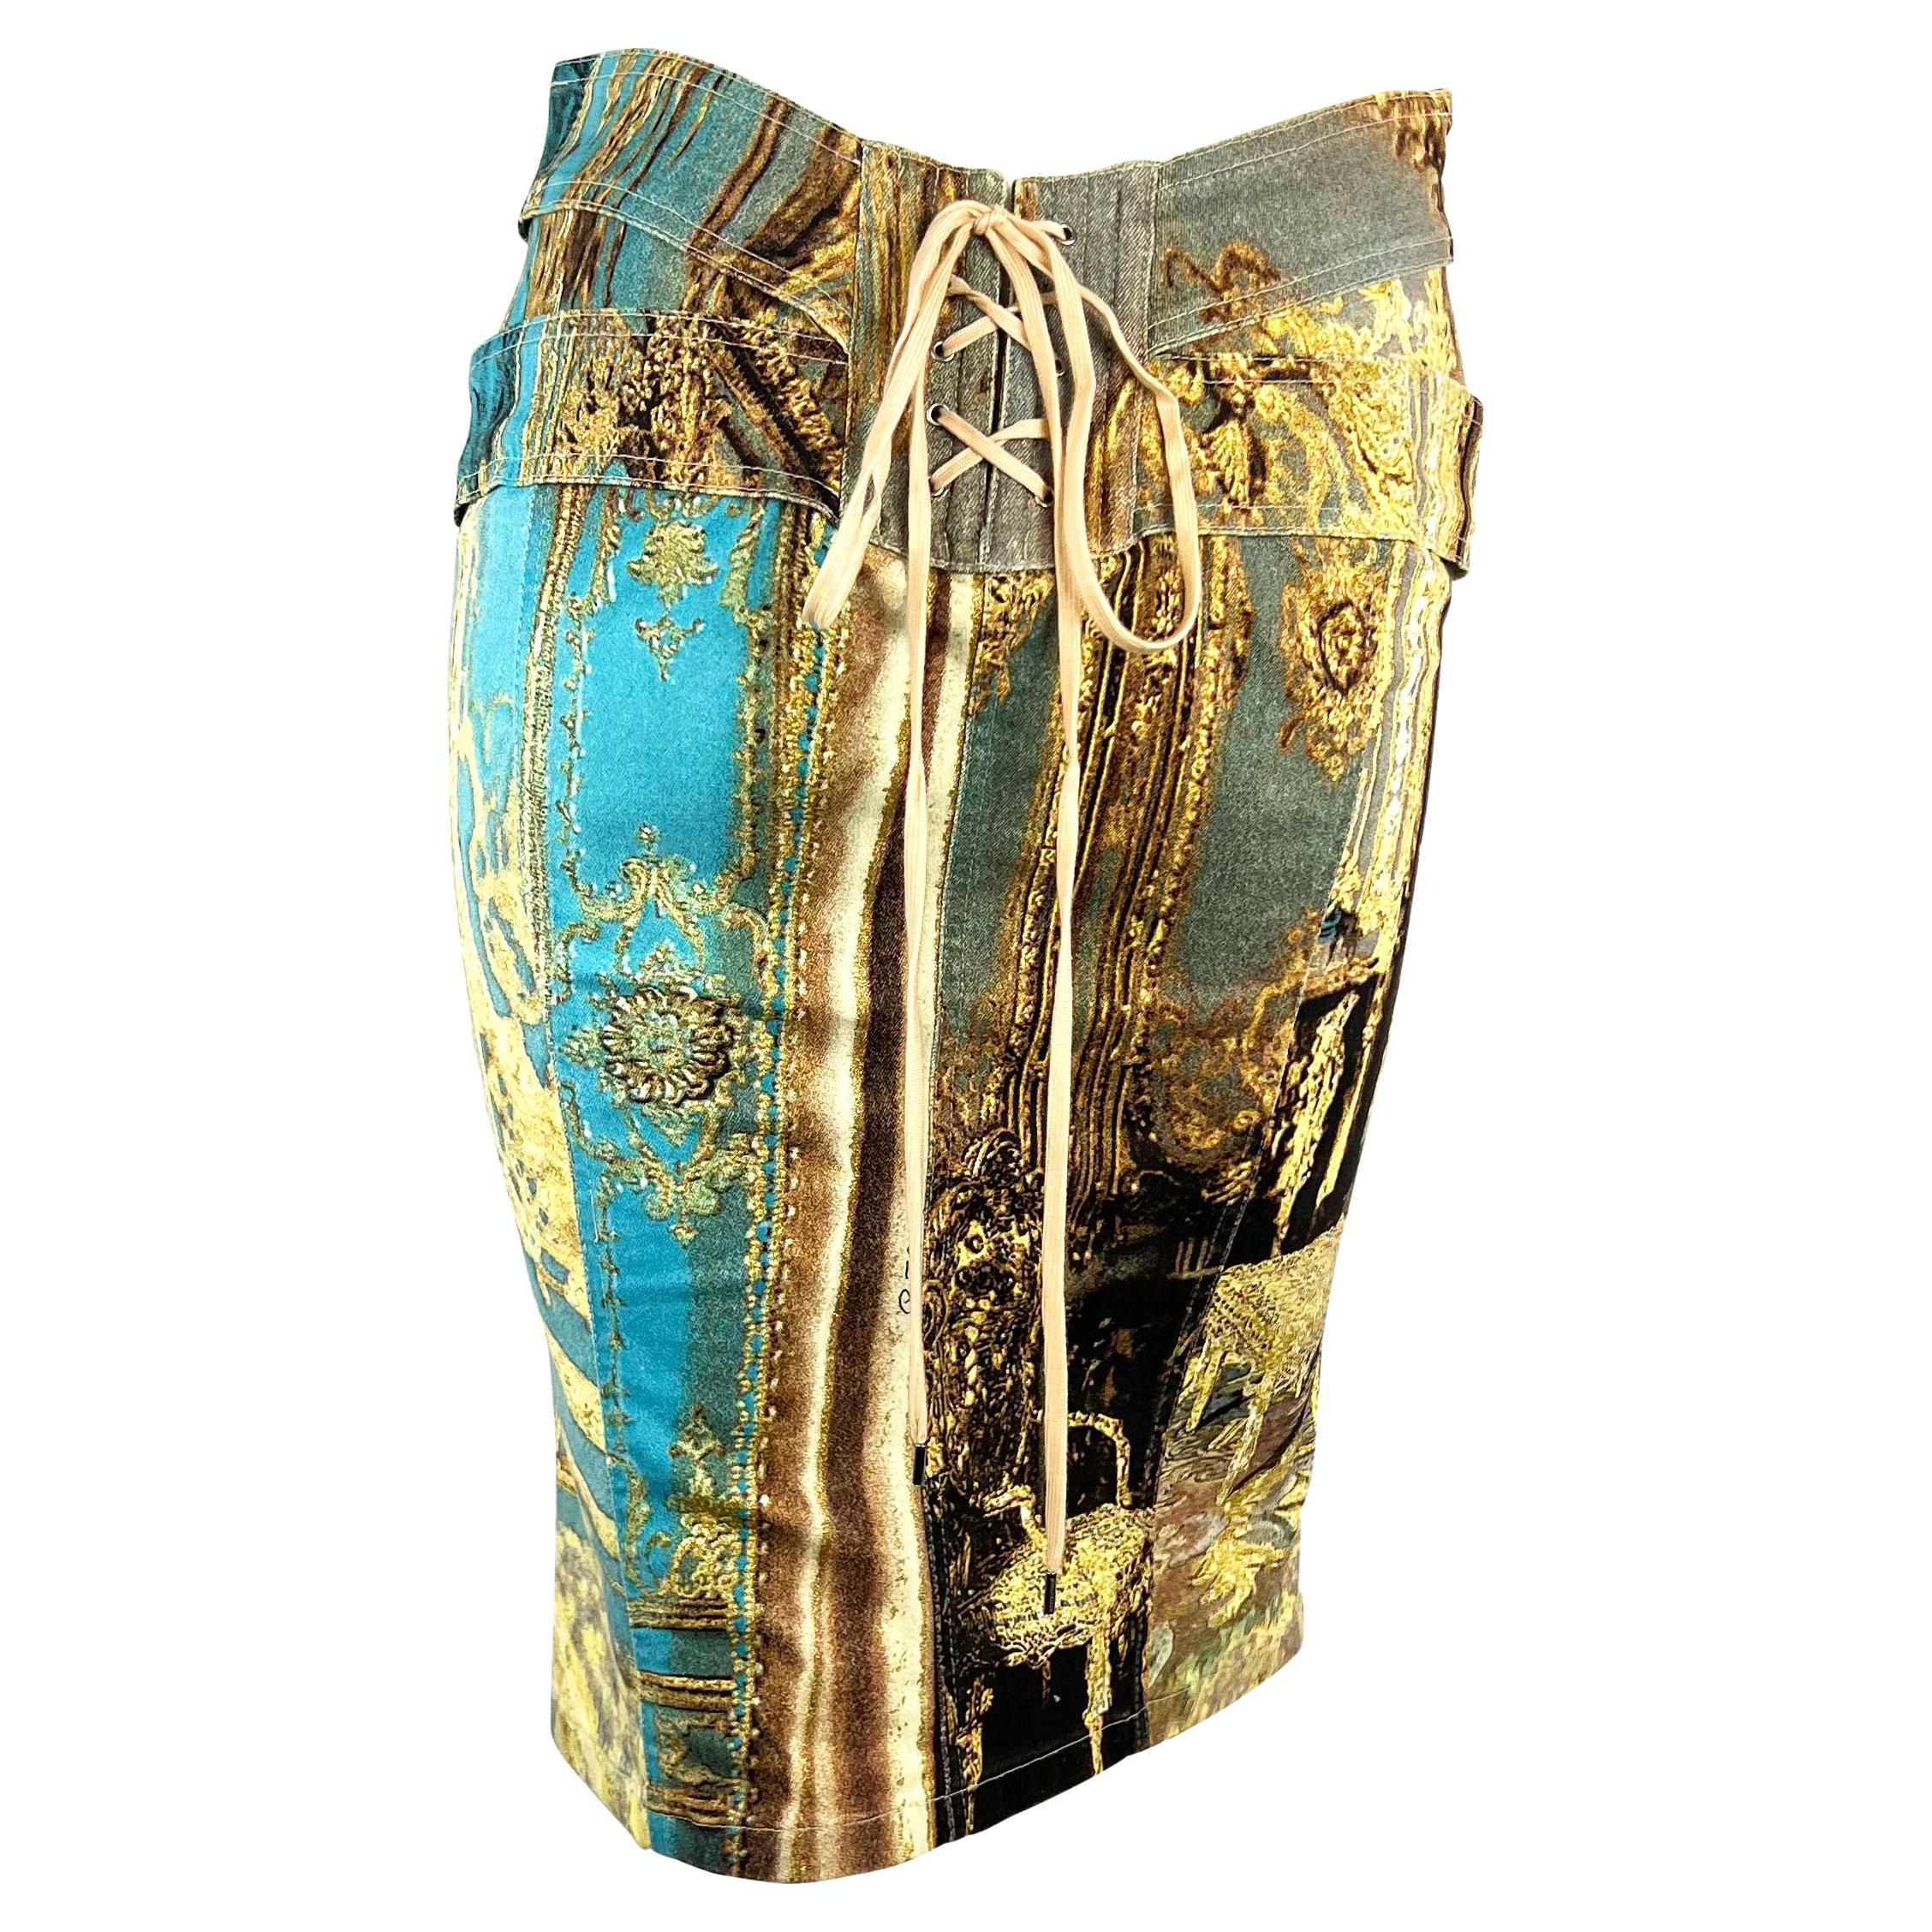 Presenting a stunning baroque Roberto Cavalli skirt. From Spring/Summer 2003, this skirt depicts a baroque style room with musical instruments. The skirt has matching baroque print straps at the hips which connect to a hook eye closure at the front